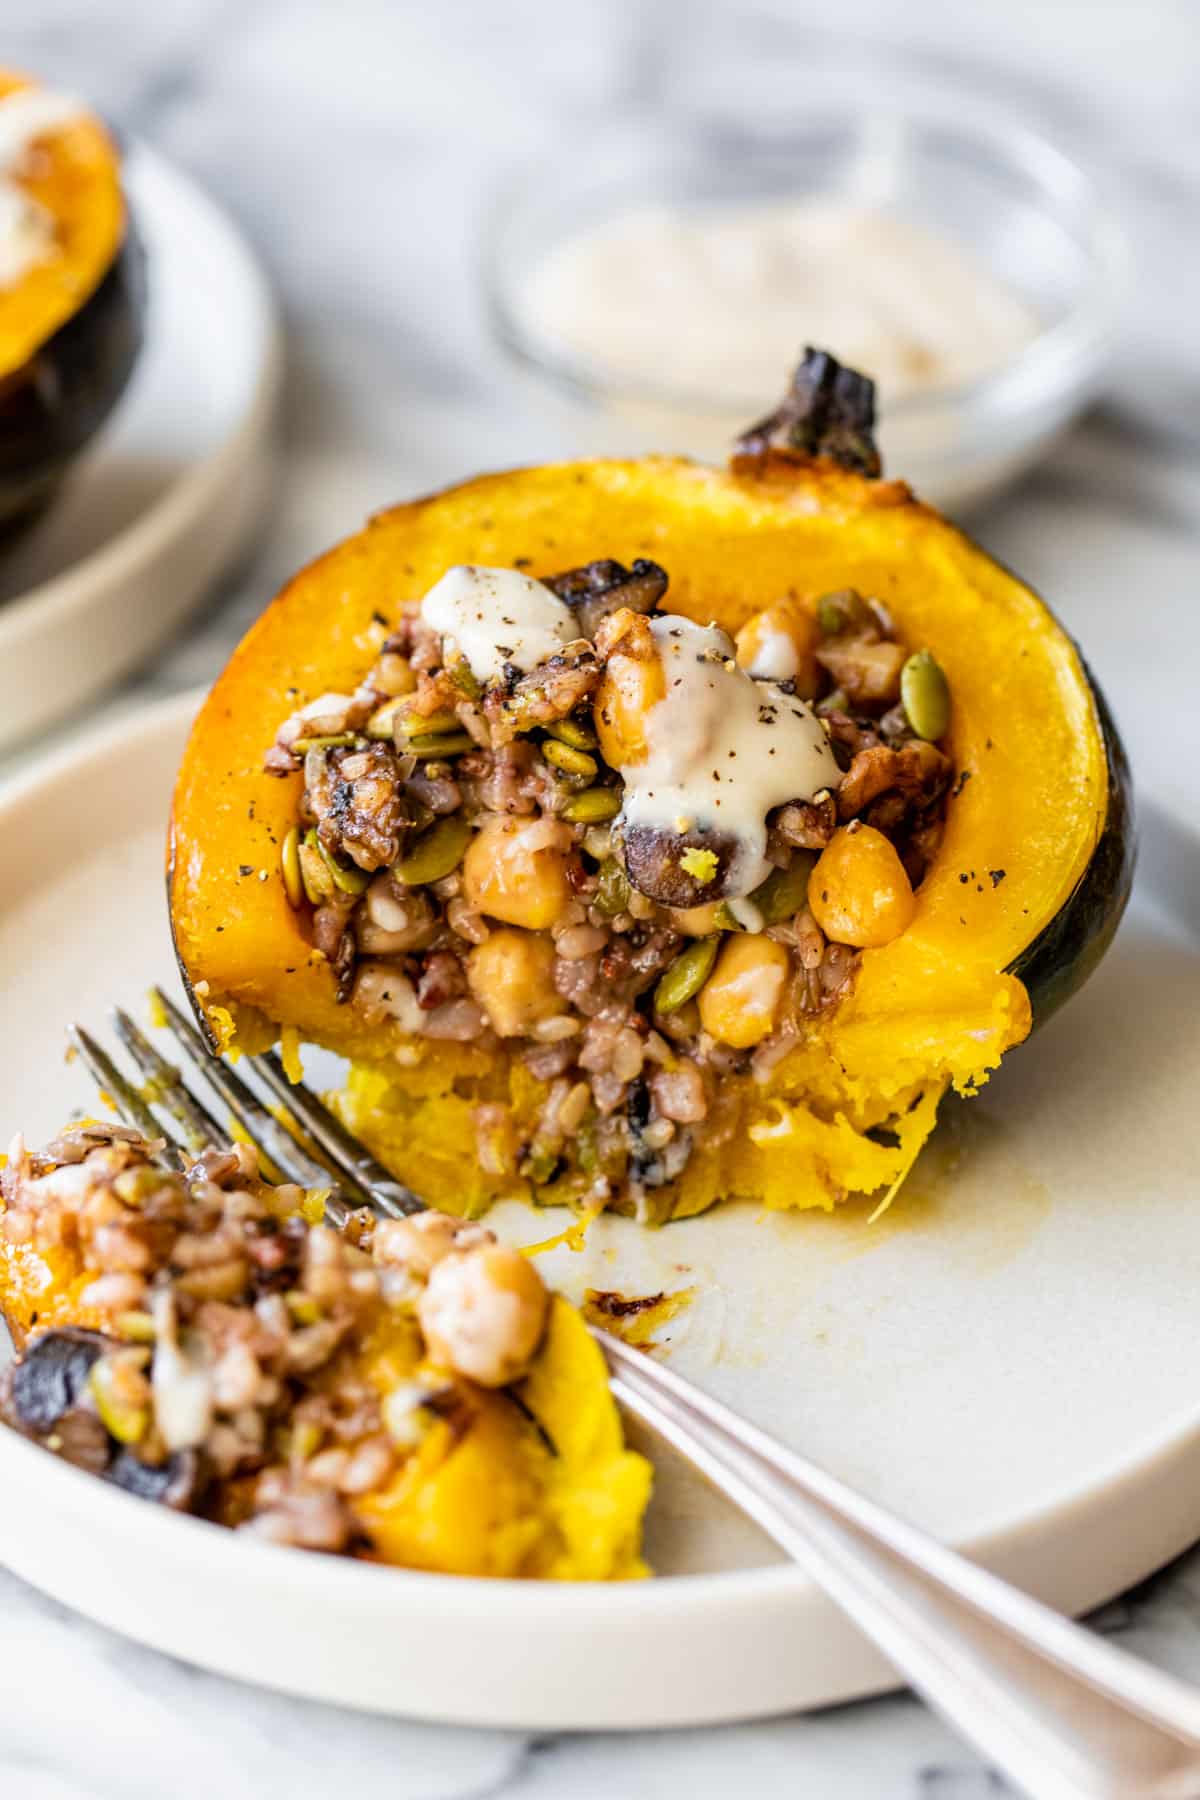 acorn squash filled with rice and chickpeas on a plate with a fork